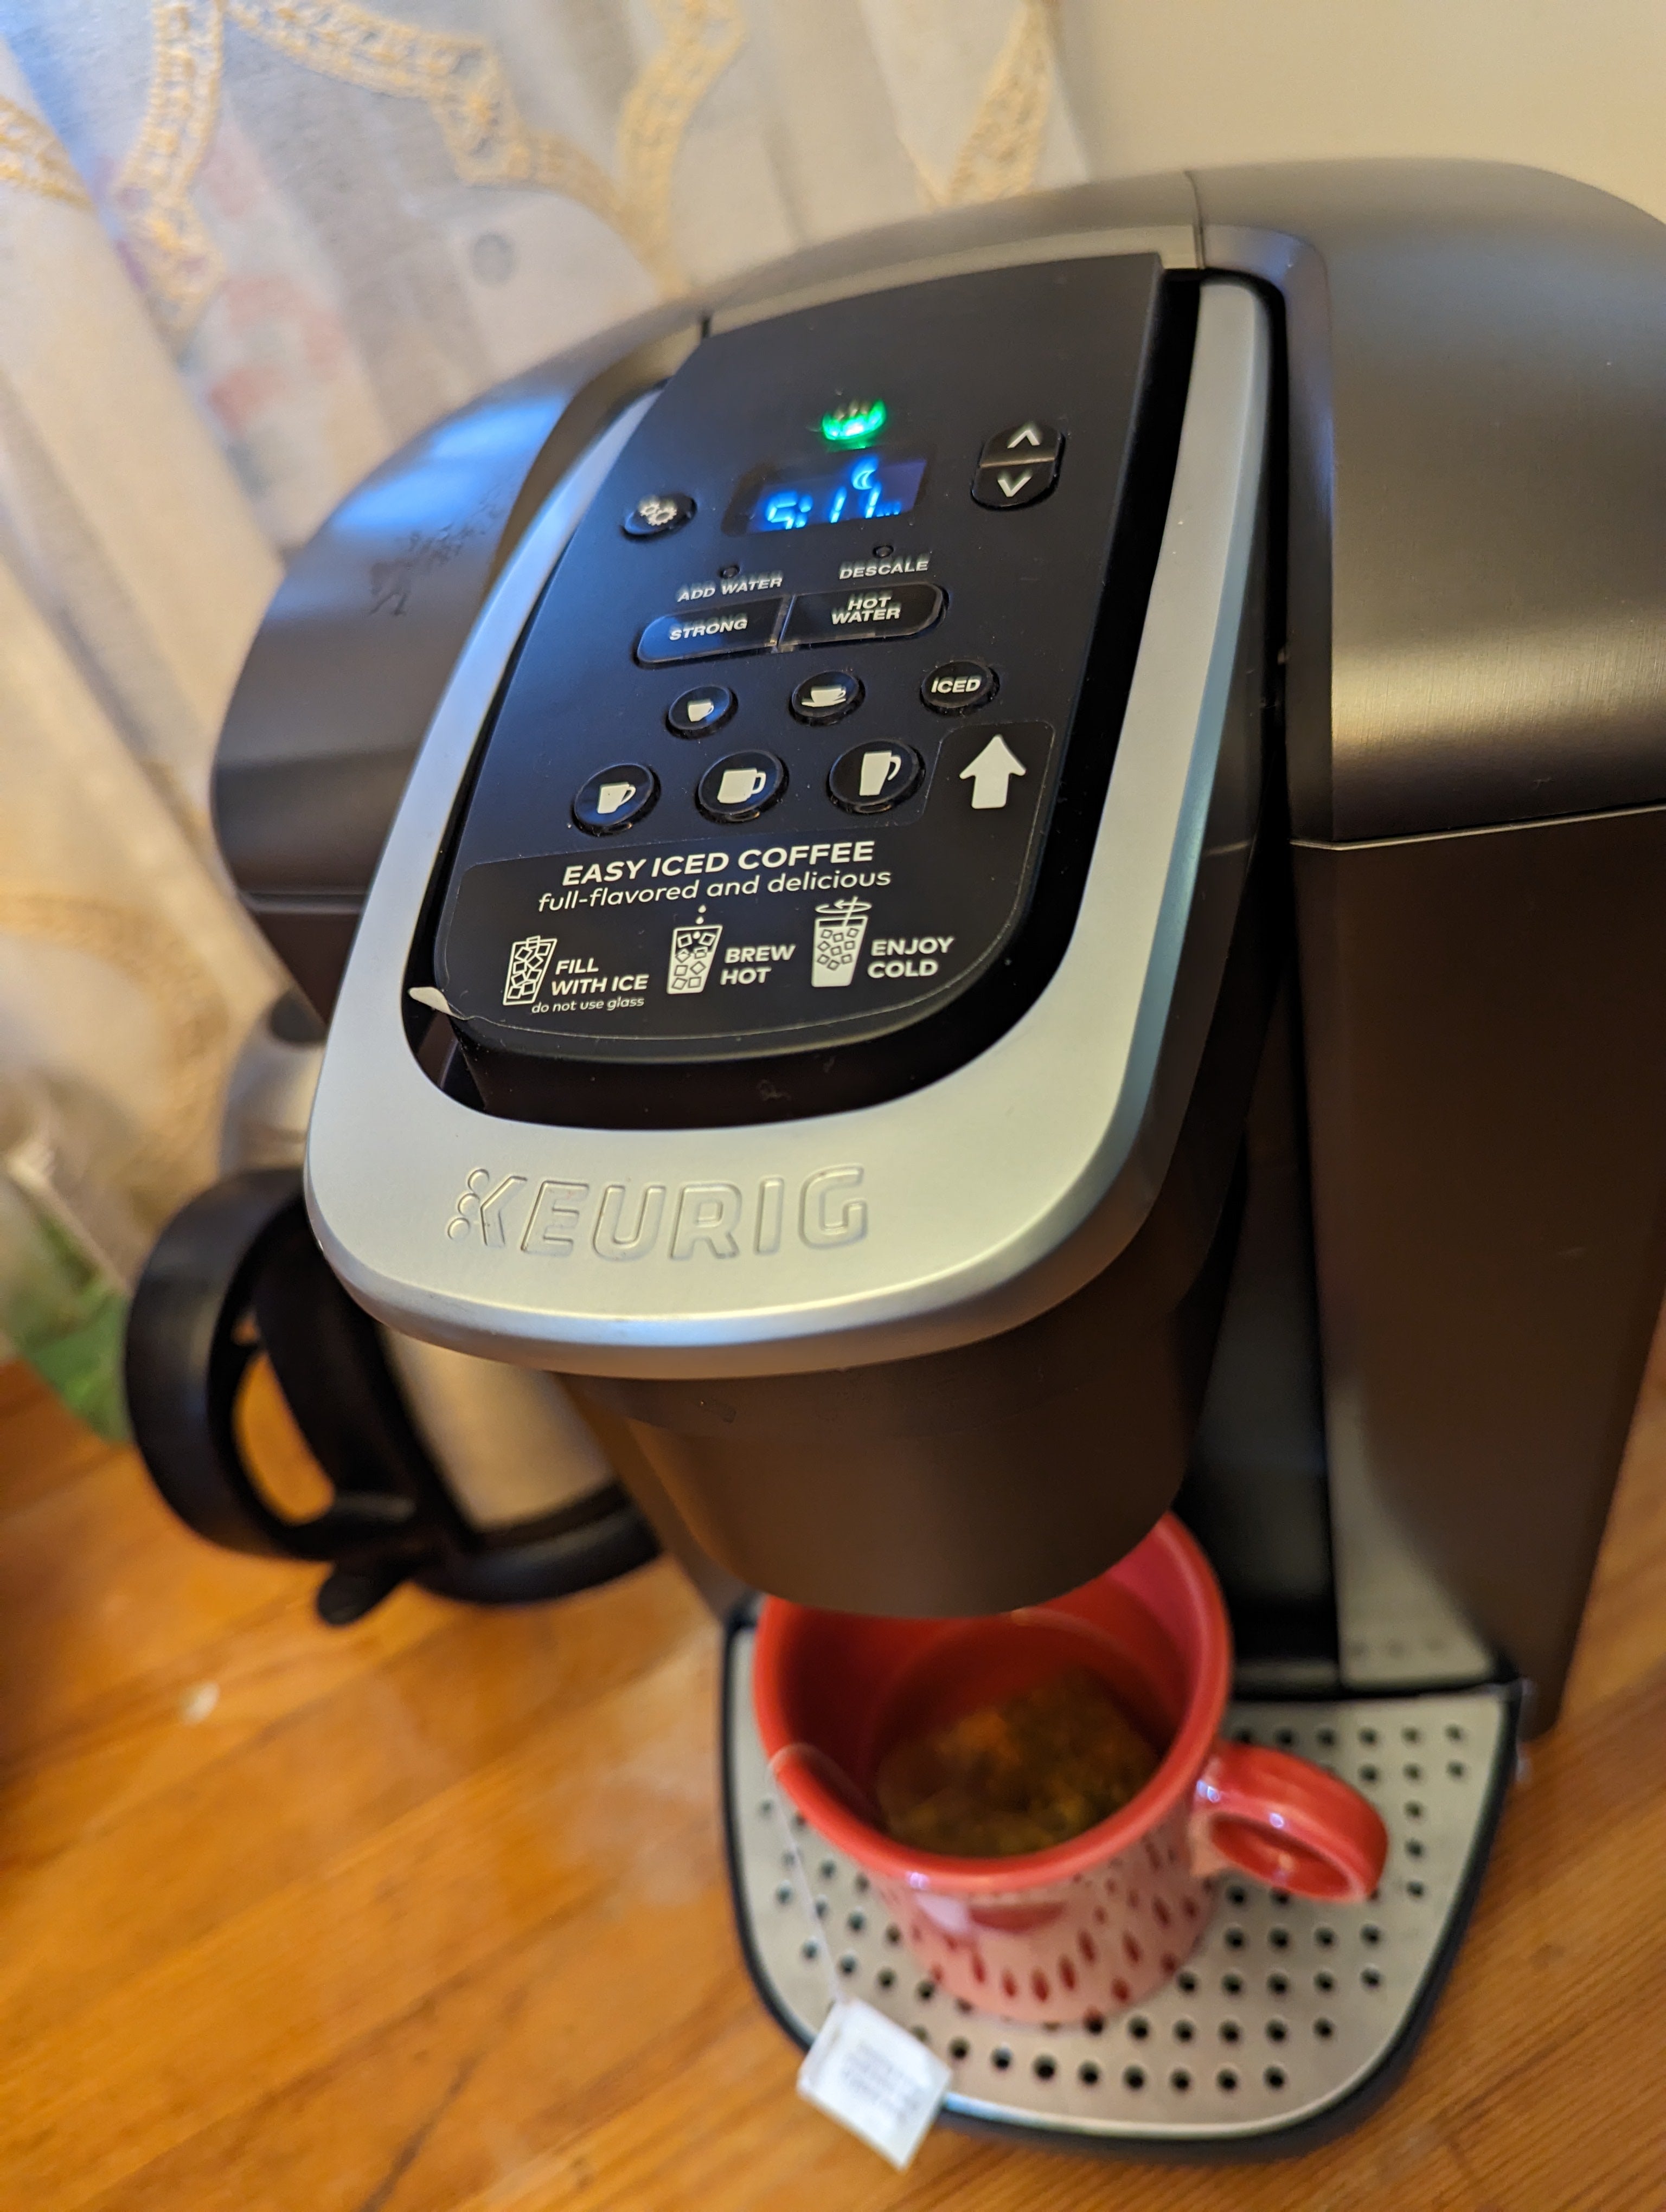 Wow! The K-Elite has over $80 off right now in Keurig's sale